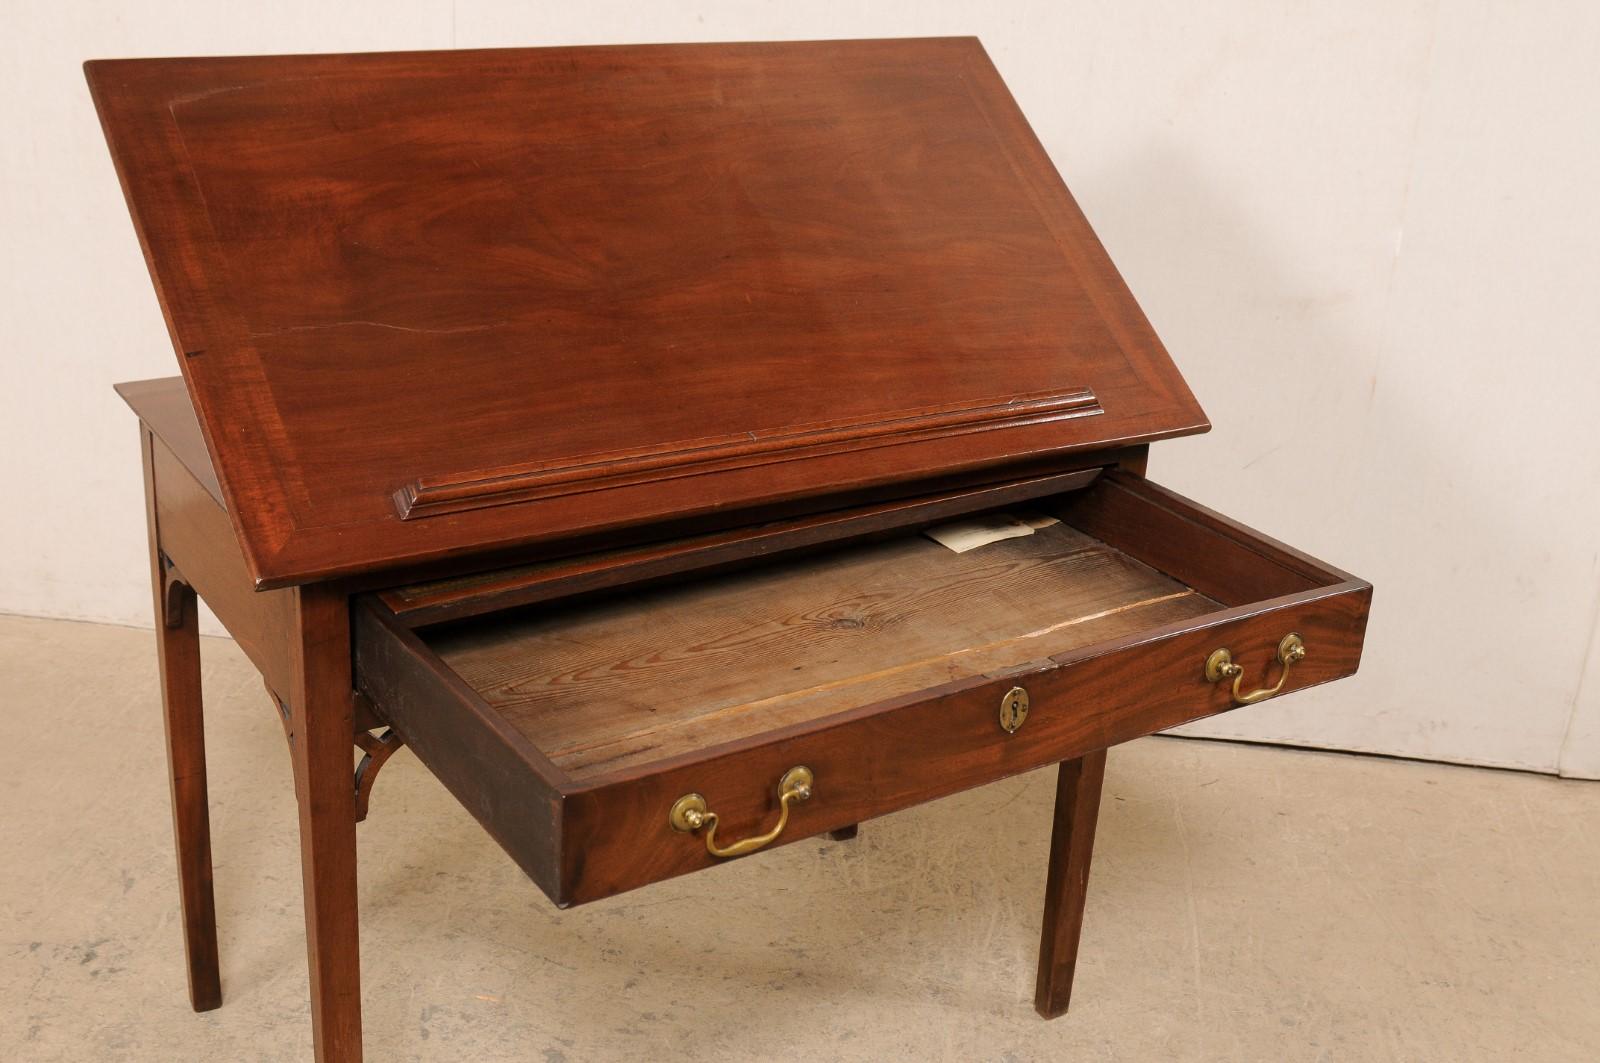 19th Century 19th C. English Architect's Mahogany Desk w/Leather Writing Pad & Dual Tilt Top For Sale